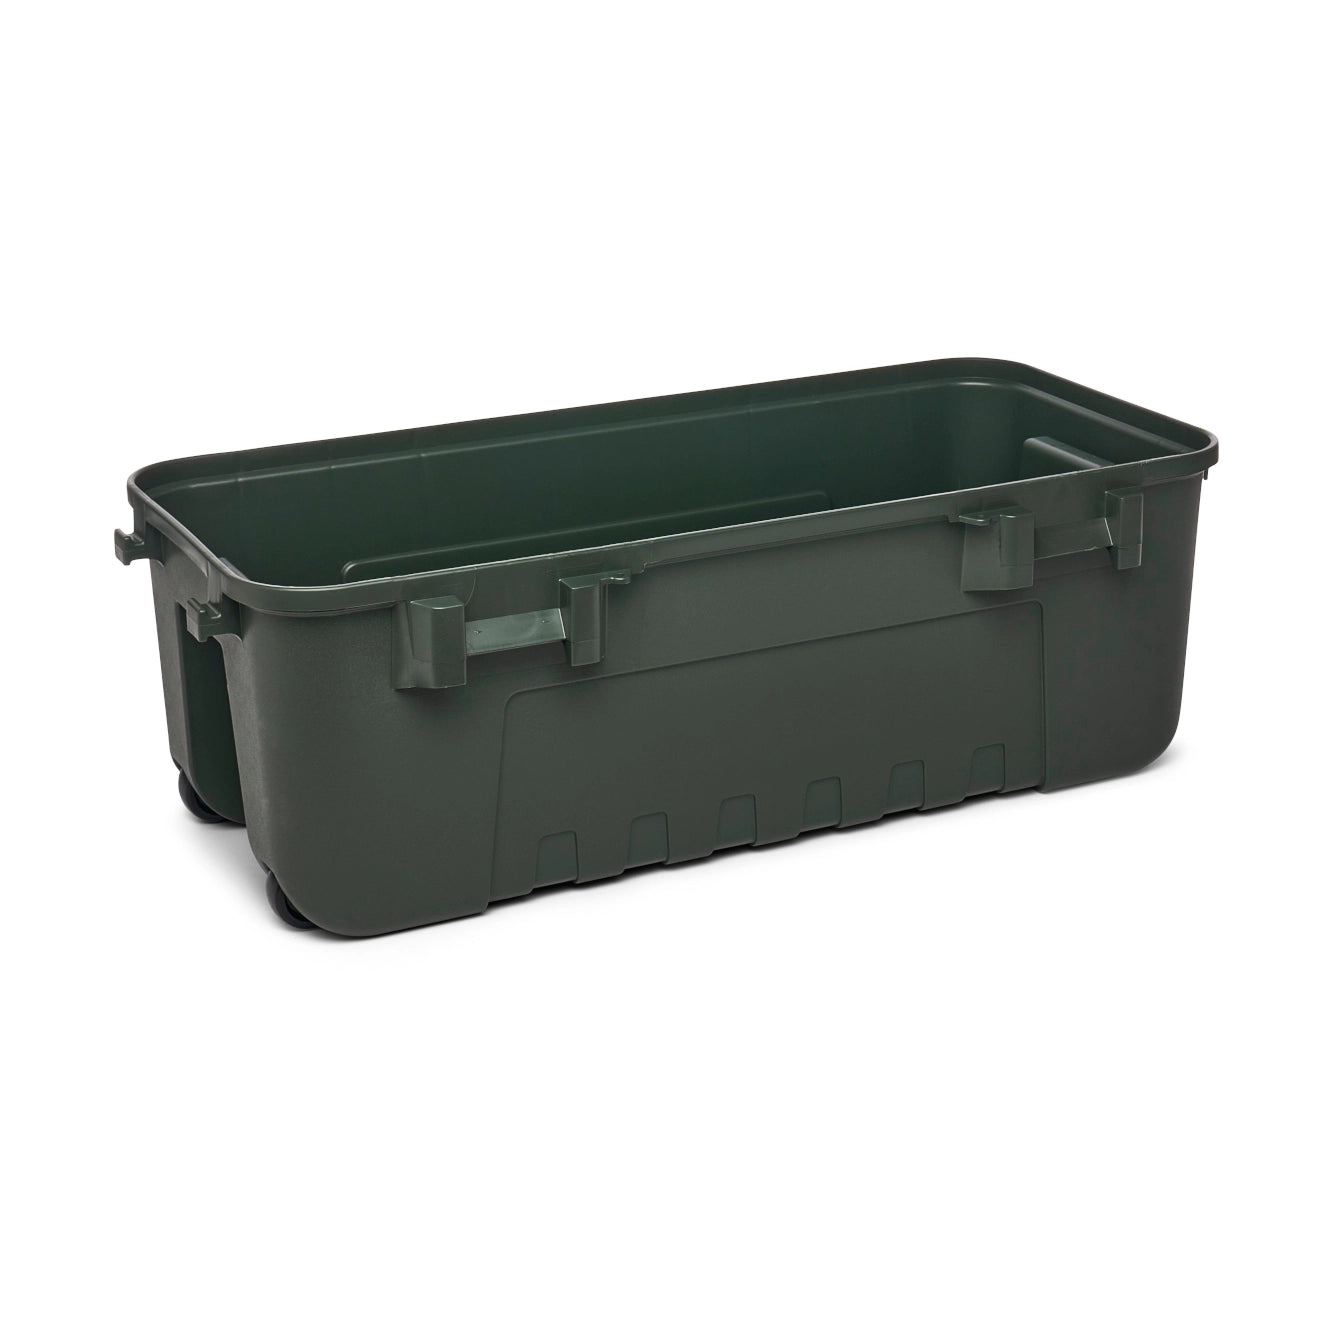 Large tactical equipment box Plano 102-litre Olive